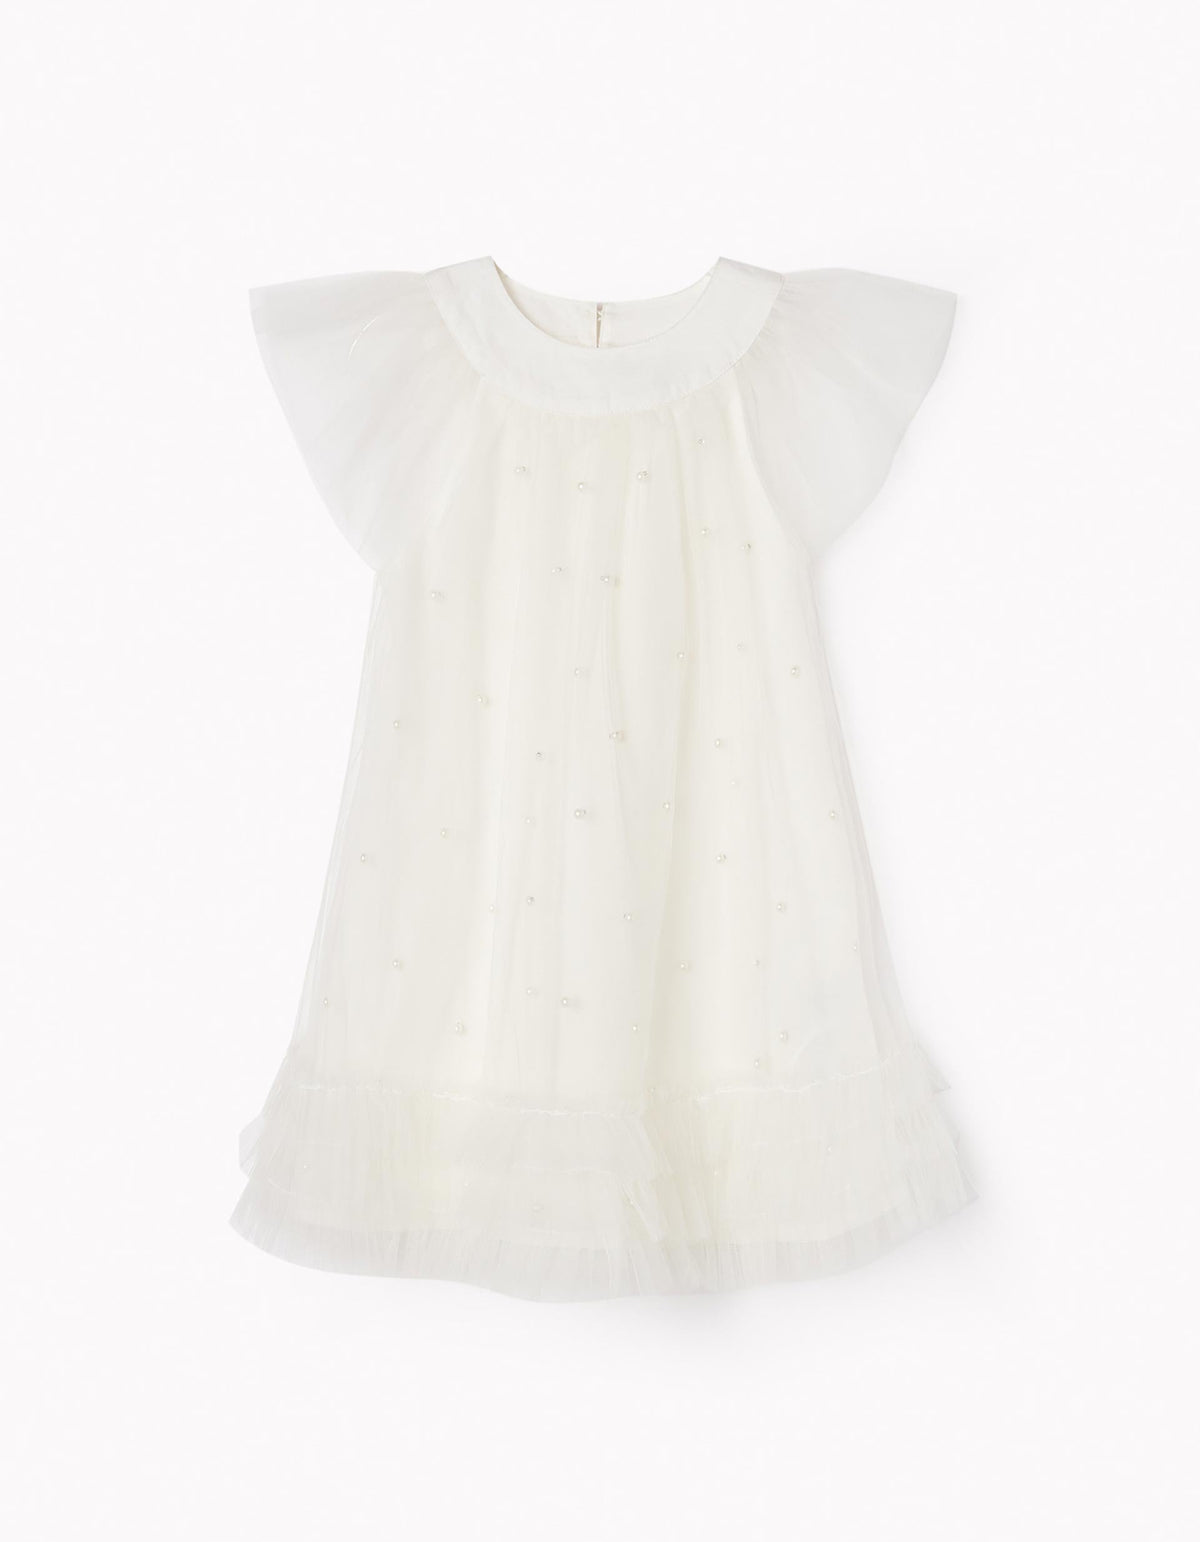 Zippy Dress With Pearls And Tulle For Baby Girls